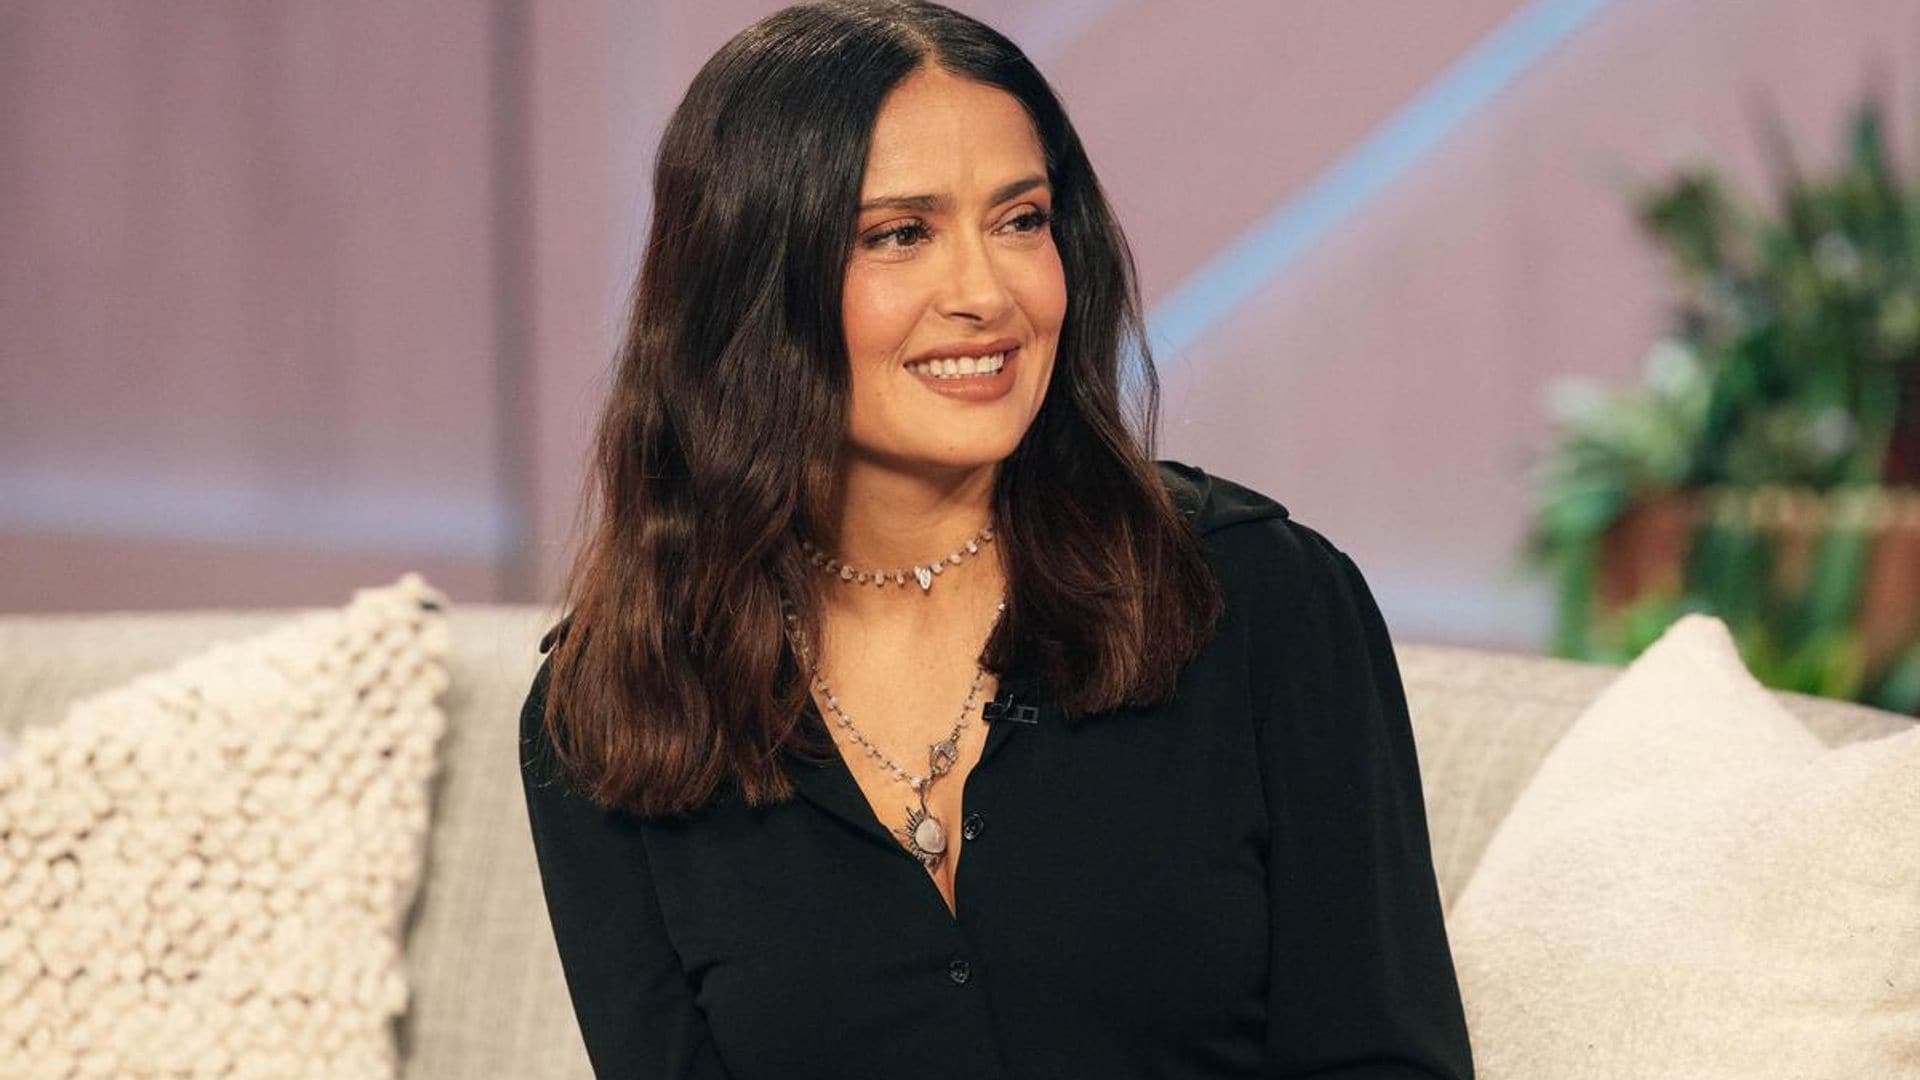 Salma Hayek shares hilarious moment while getting a massage in London